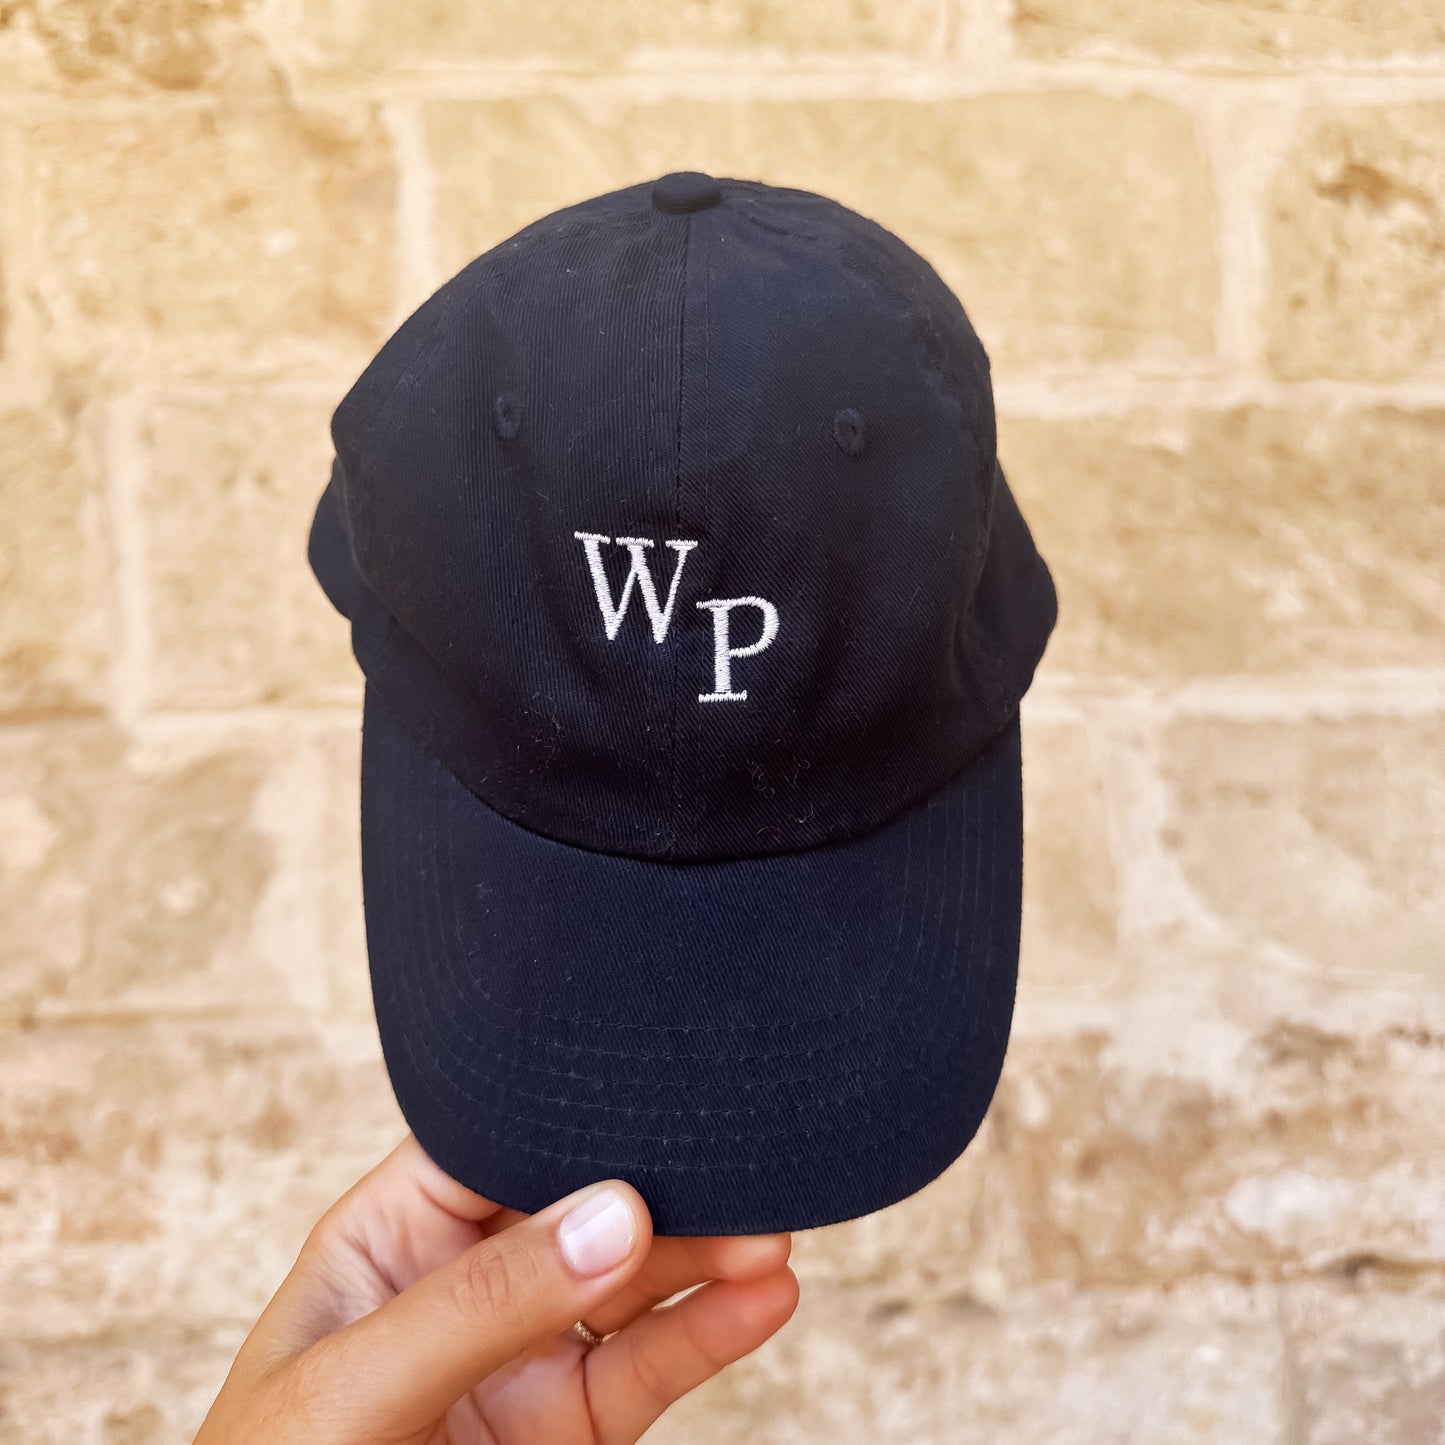 youth navy baseball hat with mini embroidered staggered initial